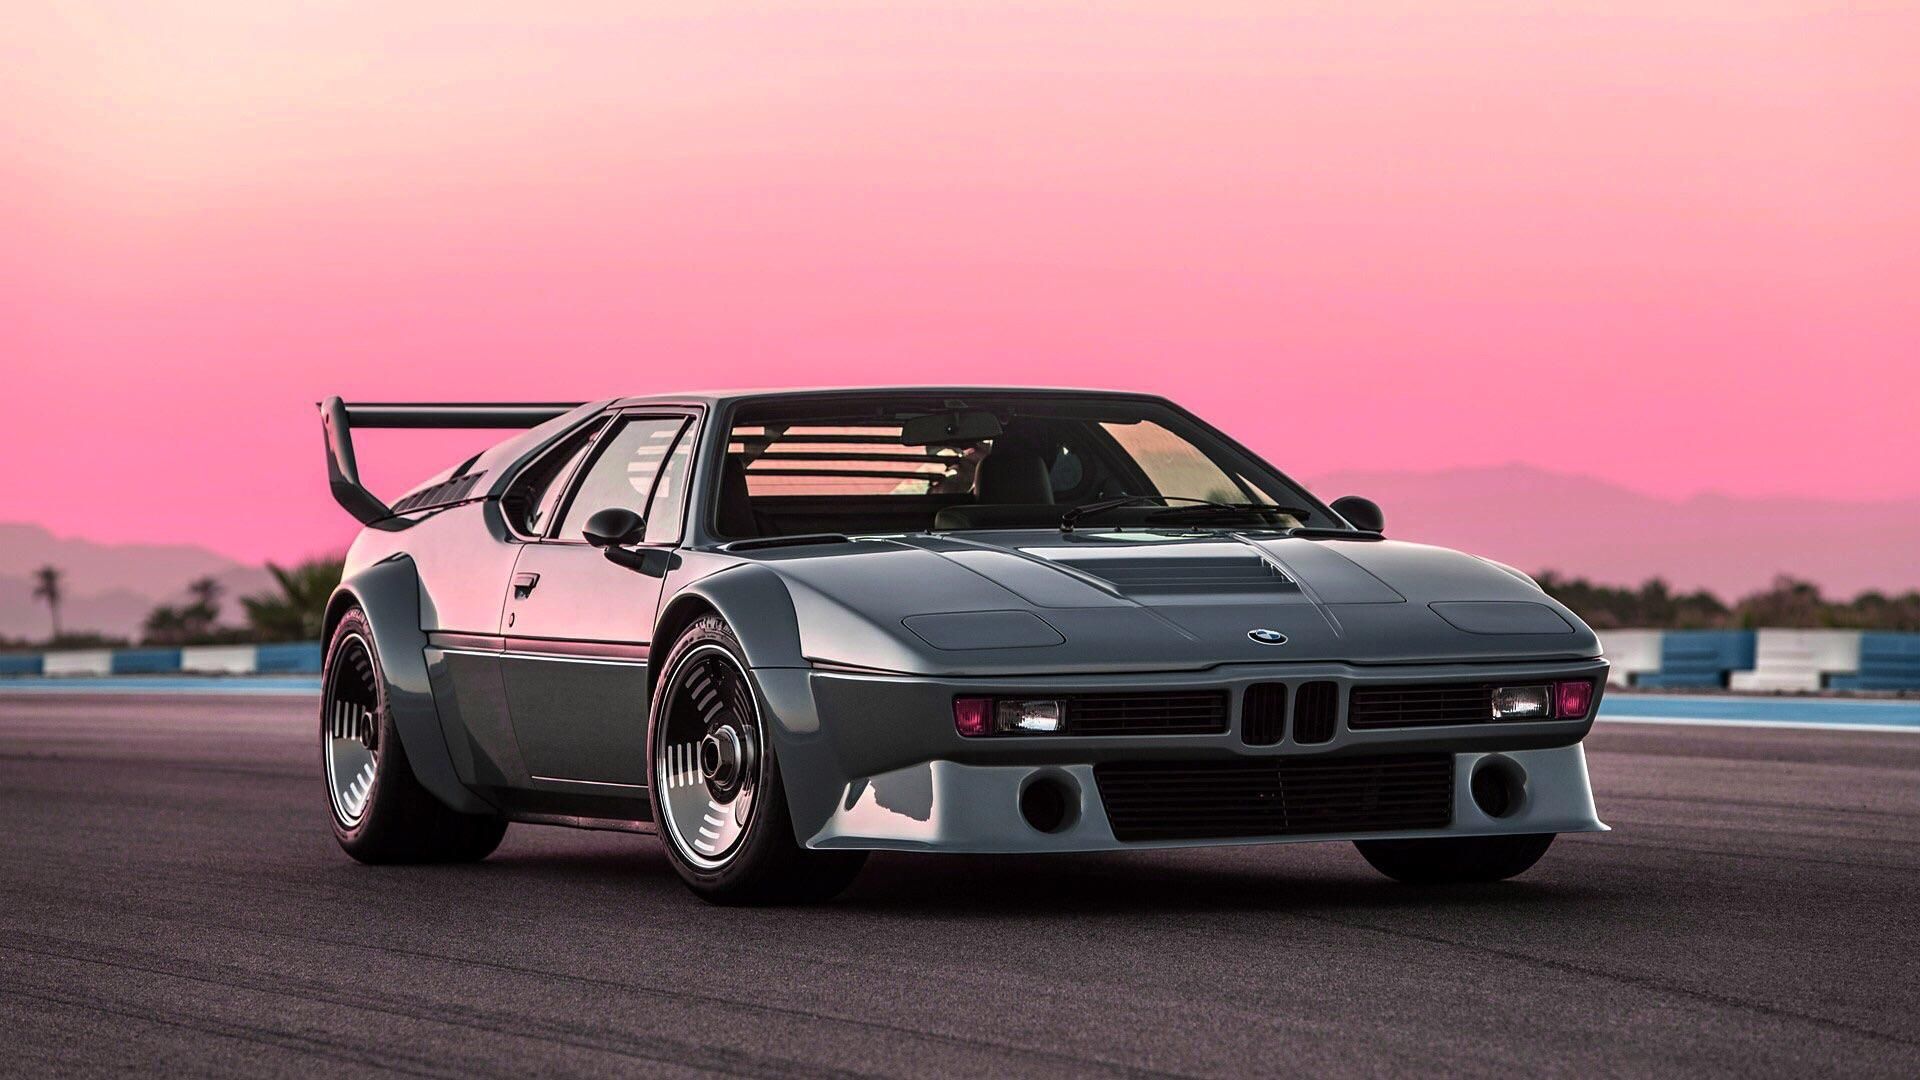 Jaw Droppingly Gorgeous Bmw M1 From R Outrun Cyberpunk